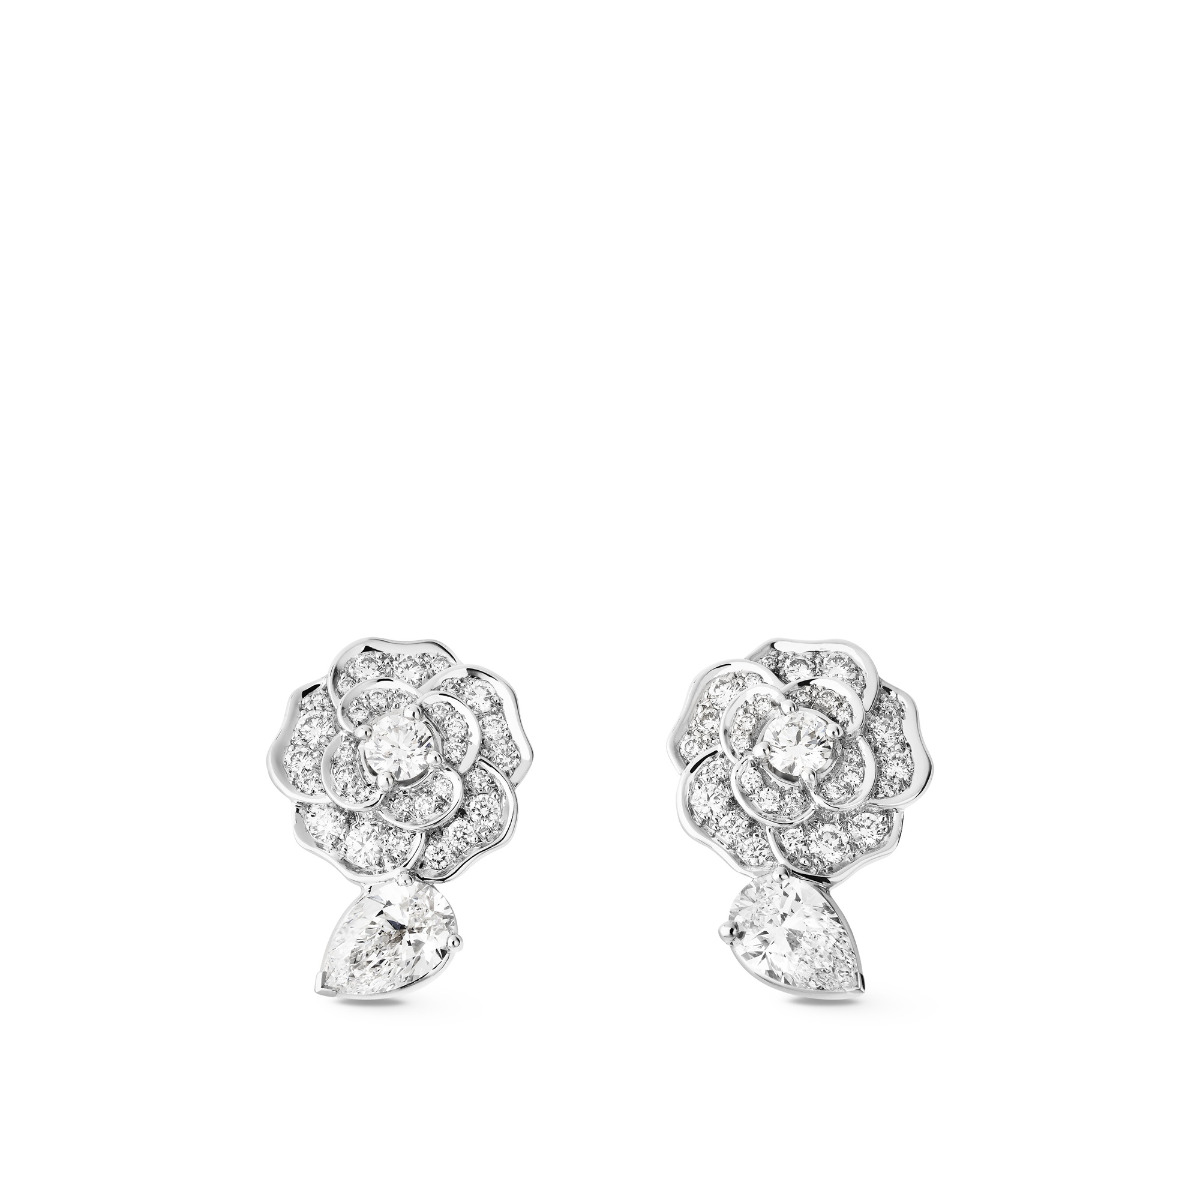 CHANEL Pre-Owned 2004 Camellia stud earrings, White